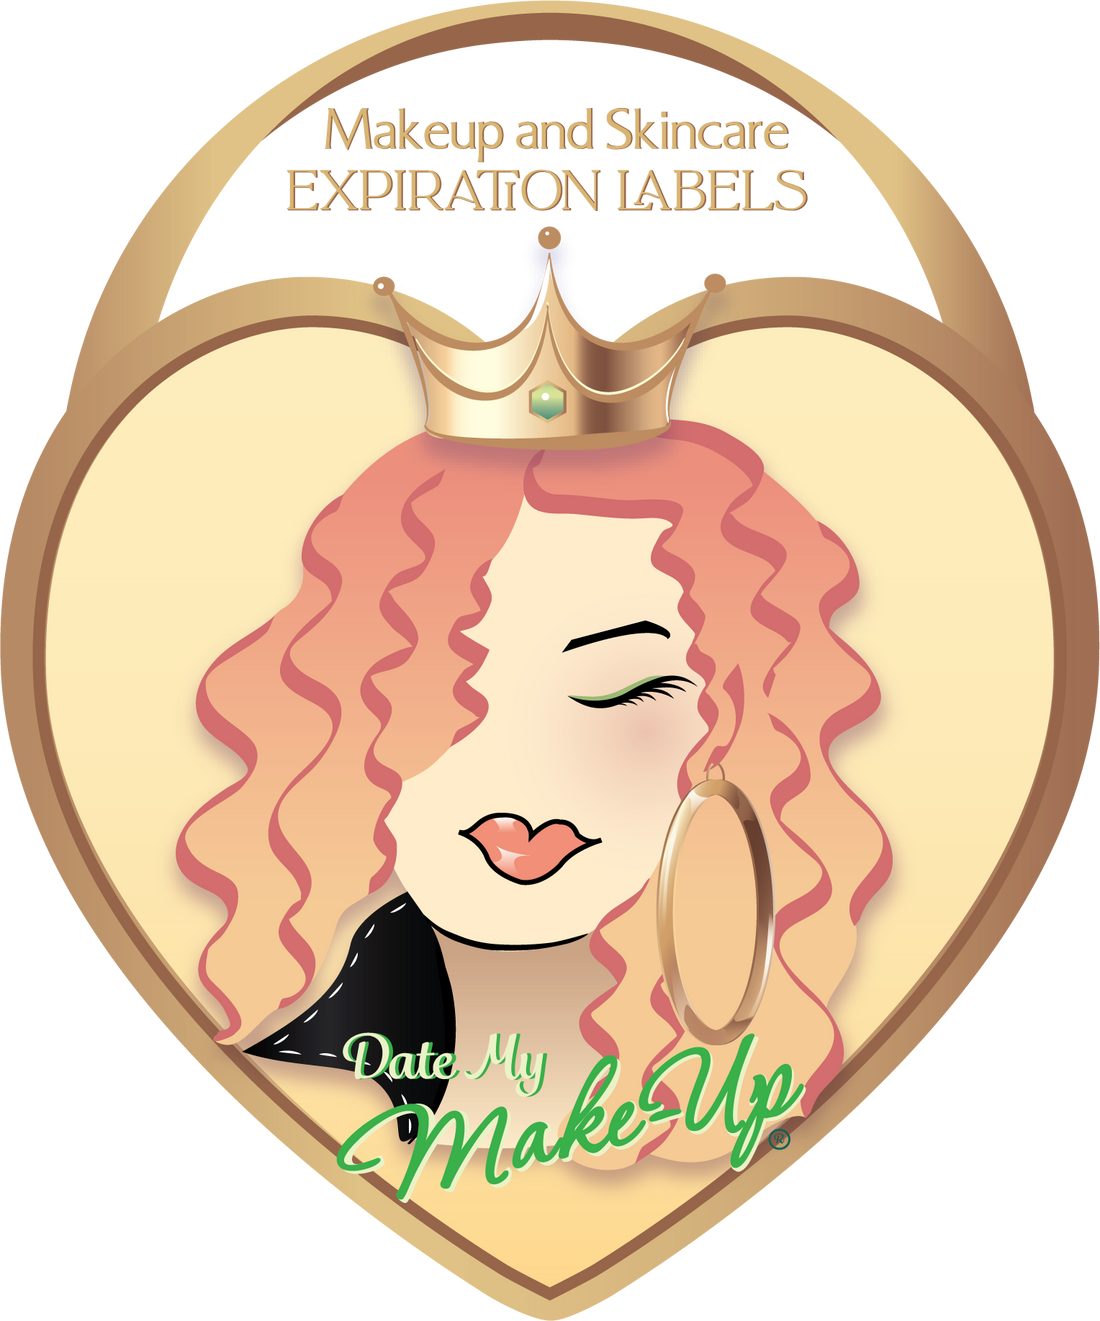 MAKEUP AND SKINCARE EXPIRATION LABEL - THE YELLOW QUEEN